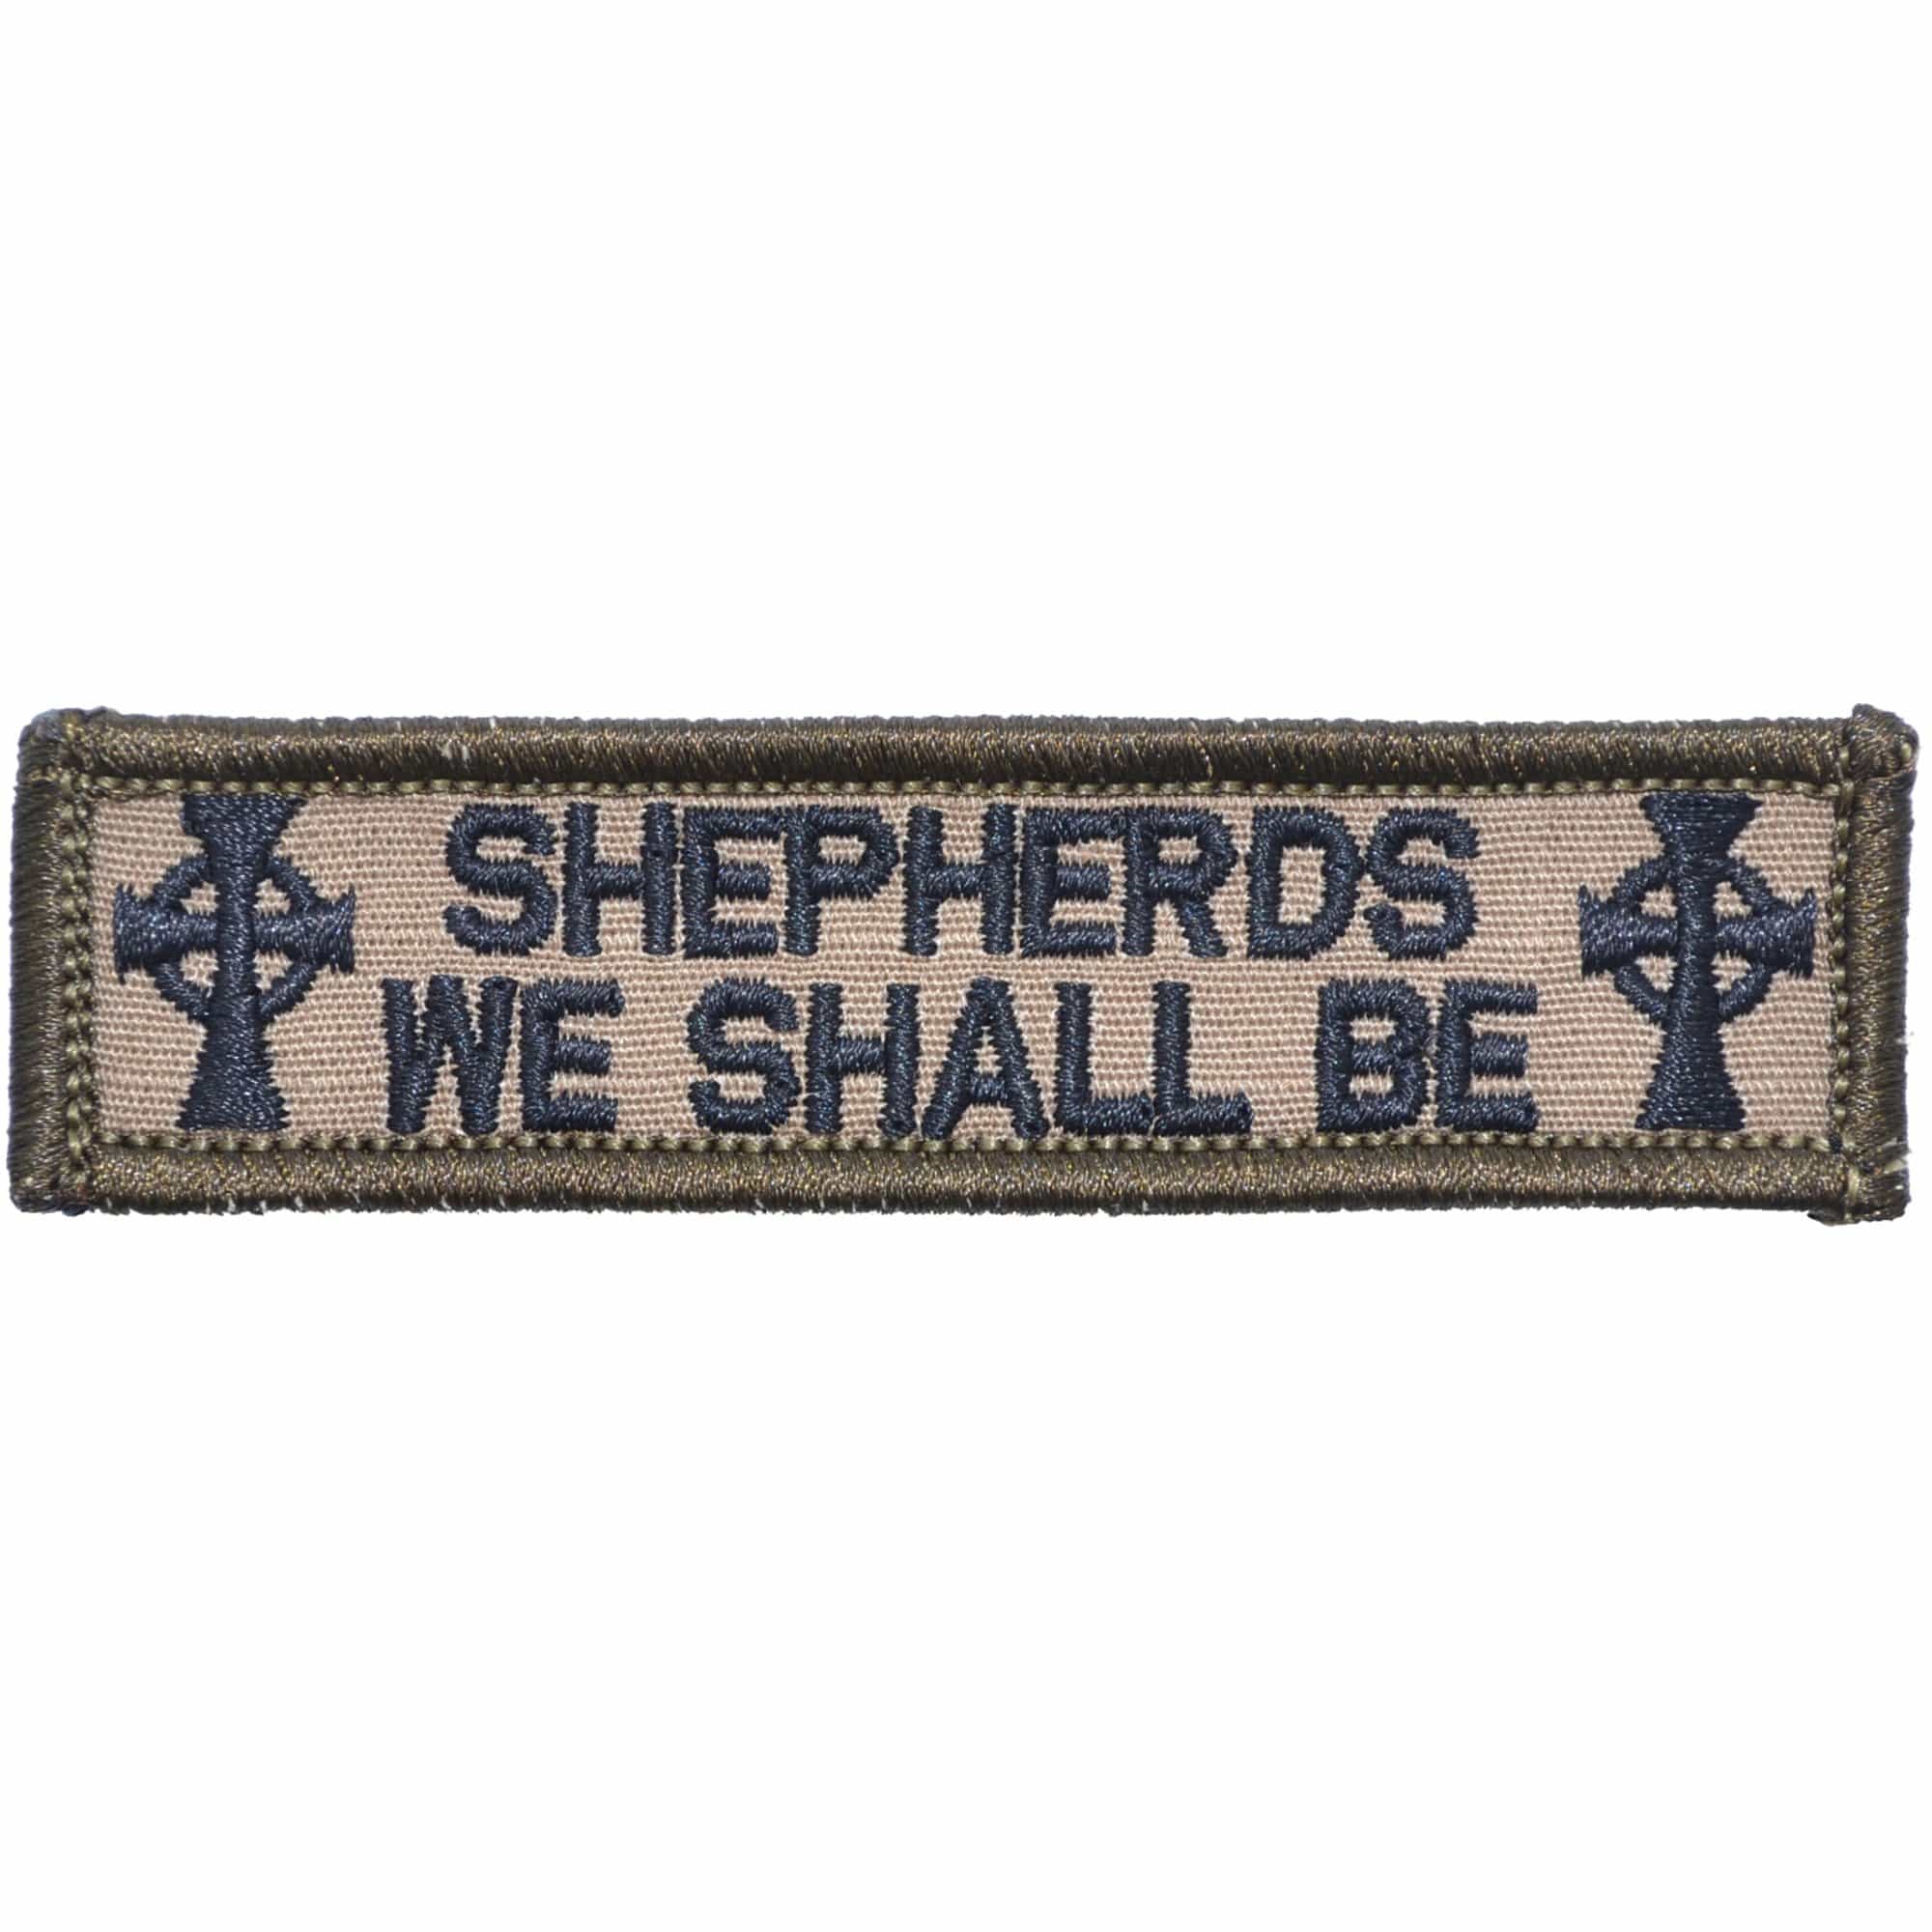 Tactical Gear Junkie Patches Coyote Brown w/ Black Shepherds We Shall Be Boondock Saints- 1x3.75 Patch